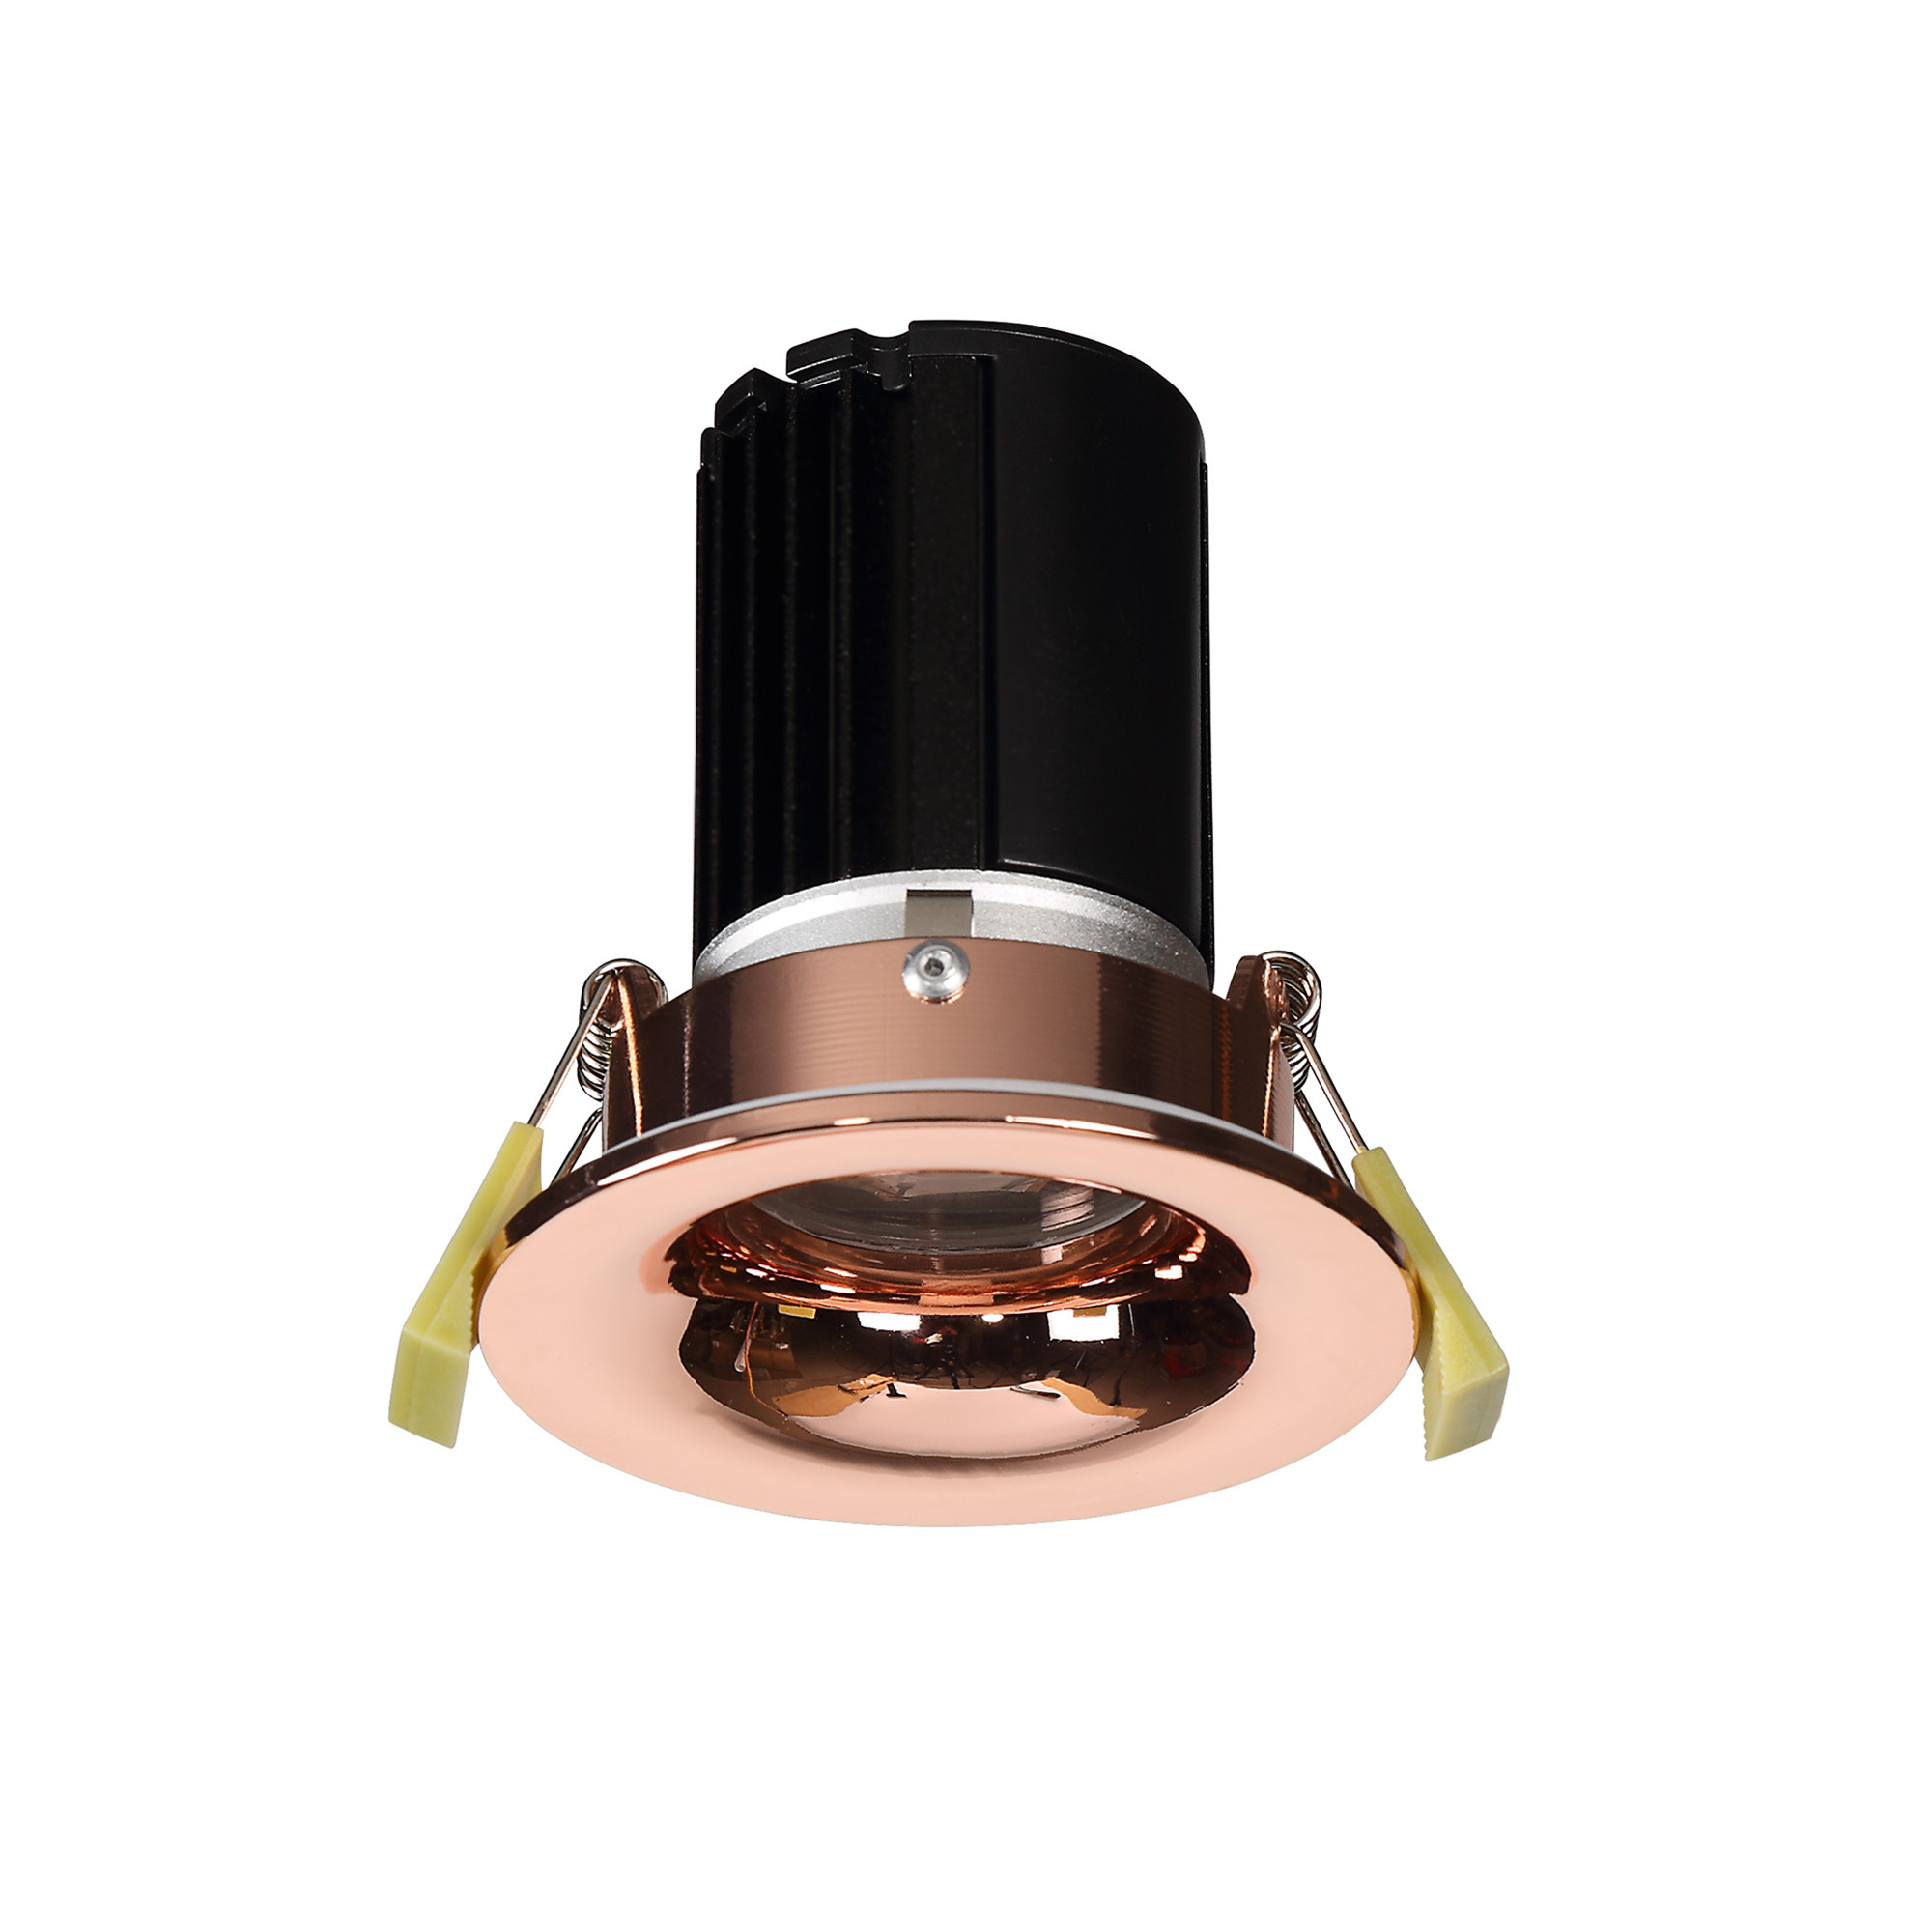 DM200808  Bruve 10 Tridonic powered 10W 2700K 750lm 12° CRI>90 LED Engine Rose Gold Fixed Round Recessed Downlight; Inner Glass cover; IP65